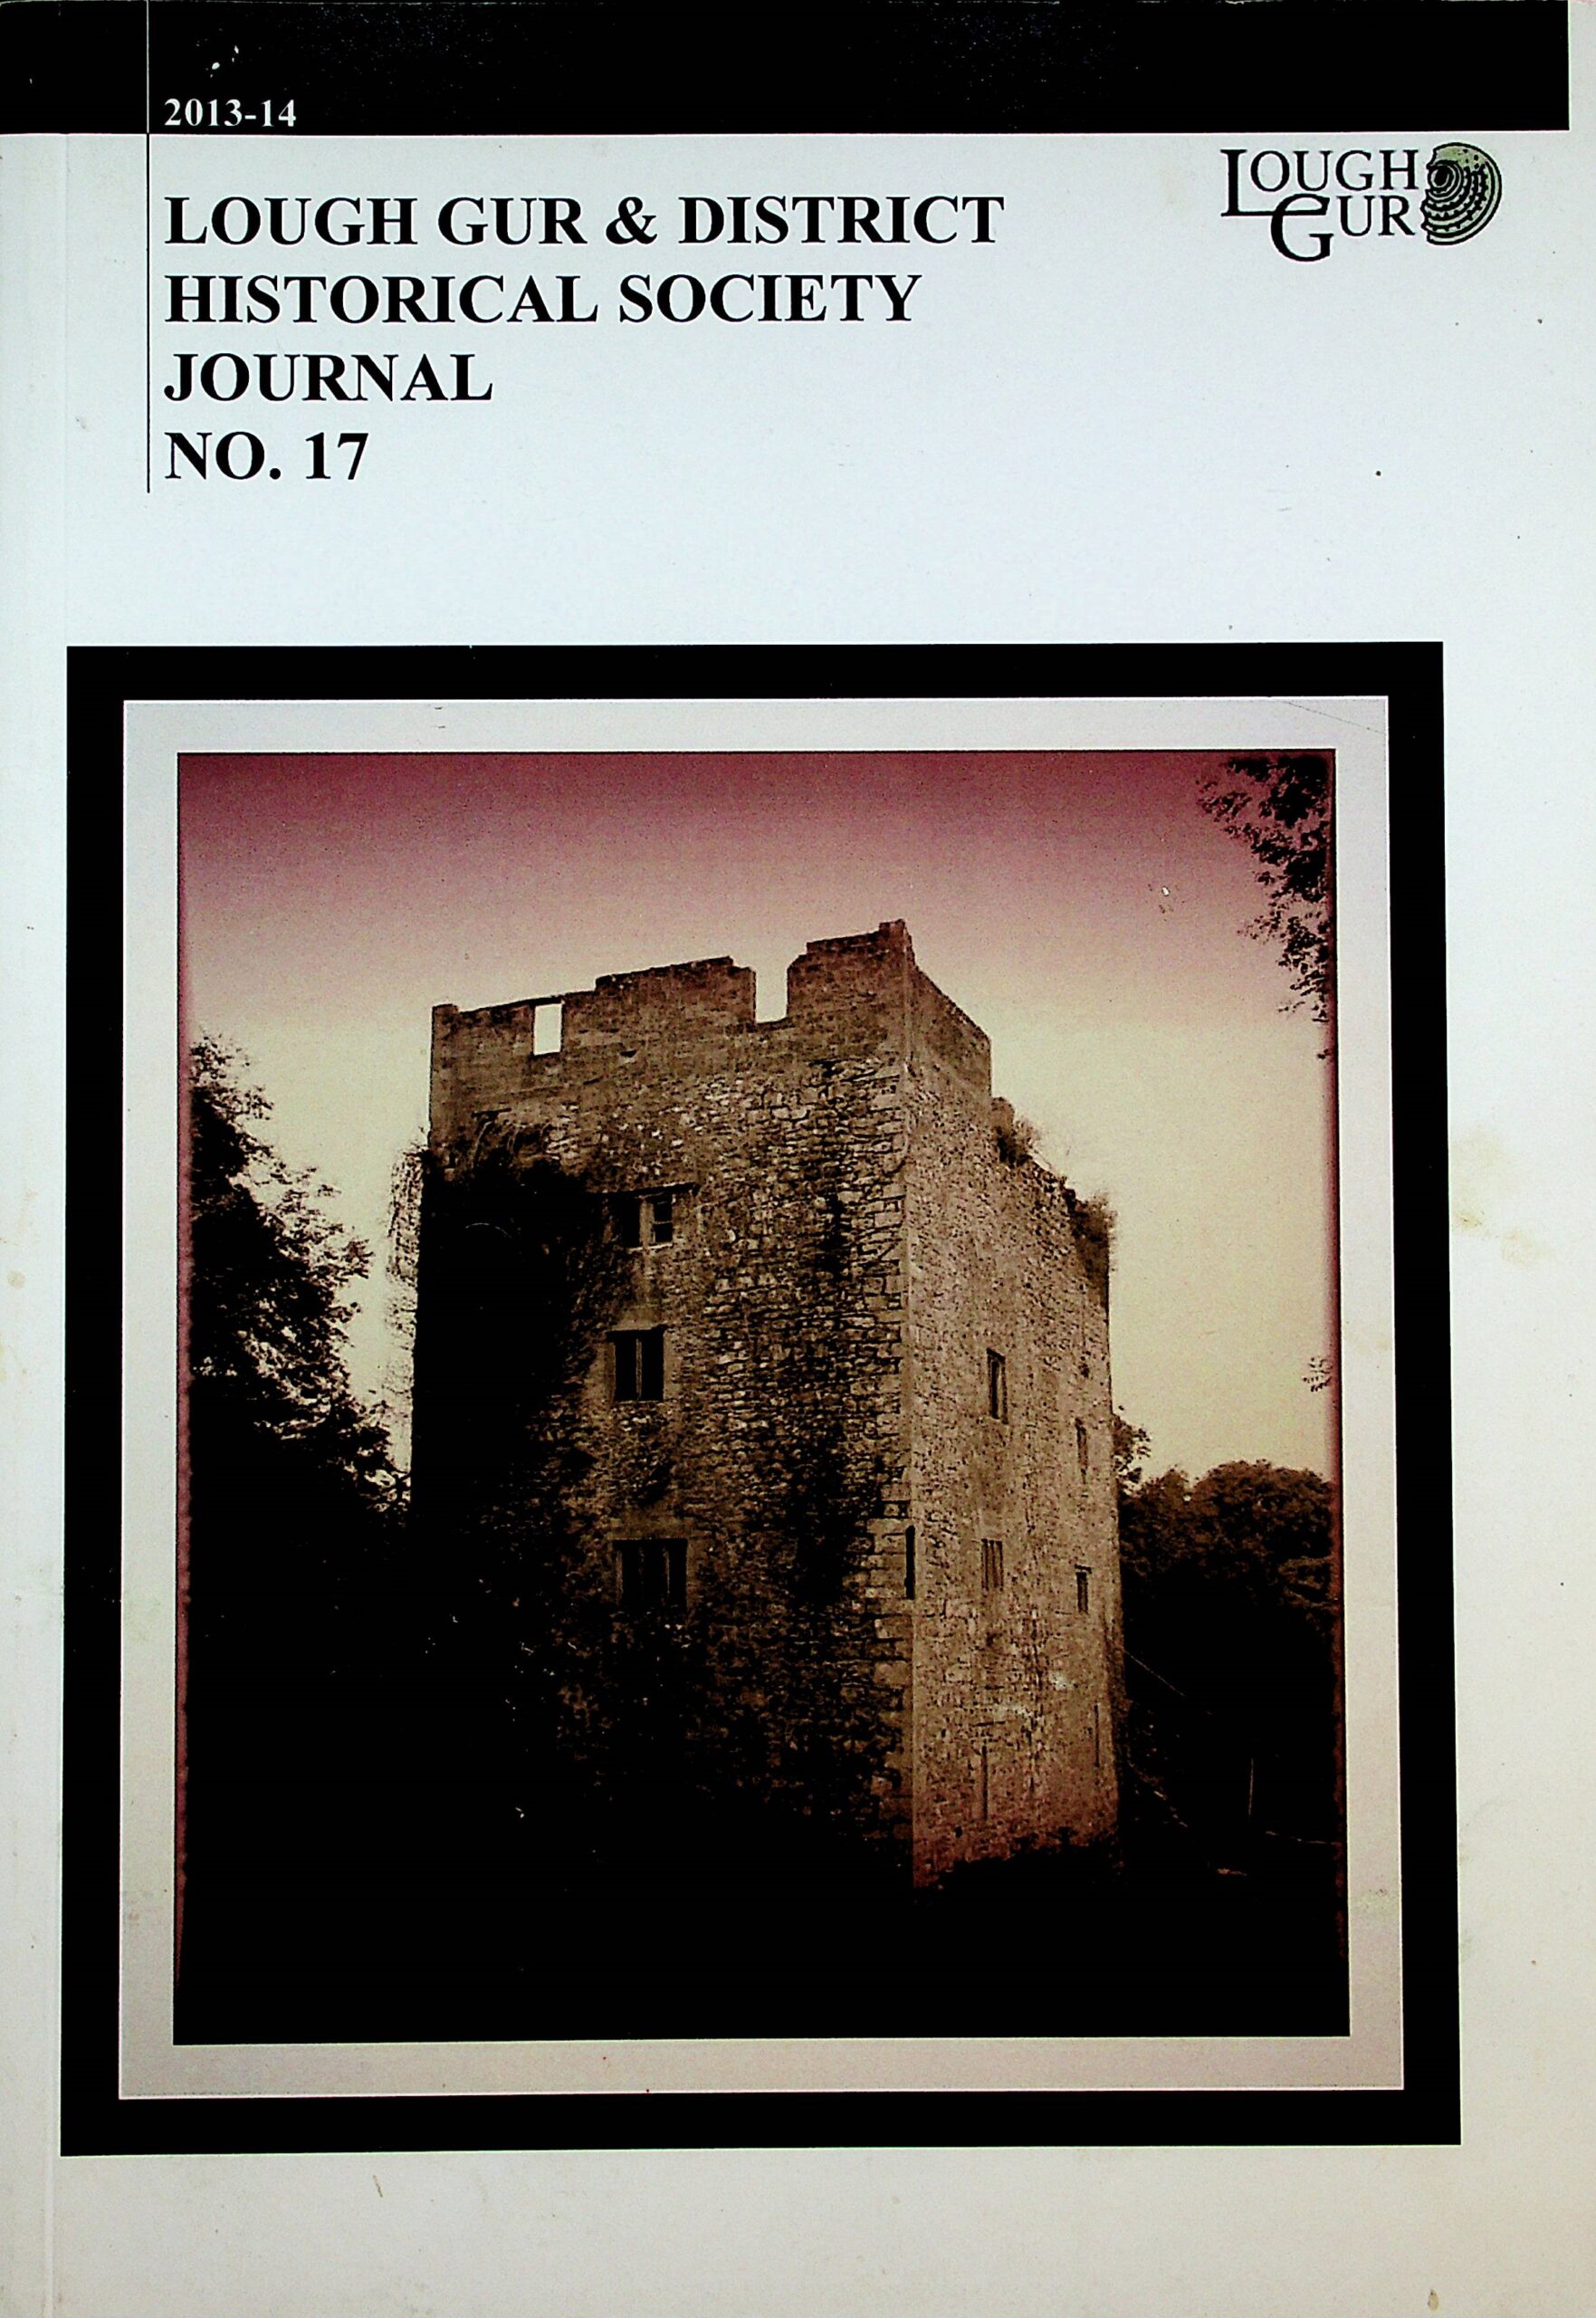 Lough Gur & District Historical Society Journal